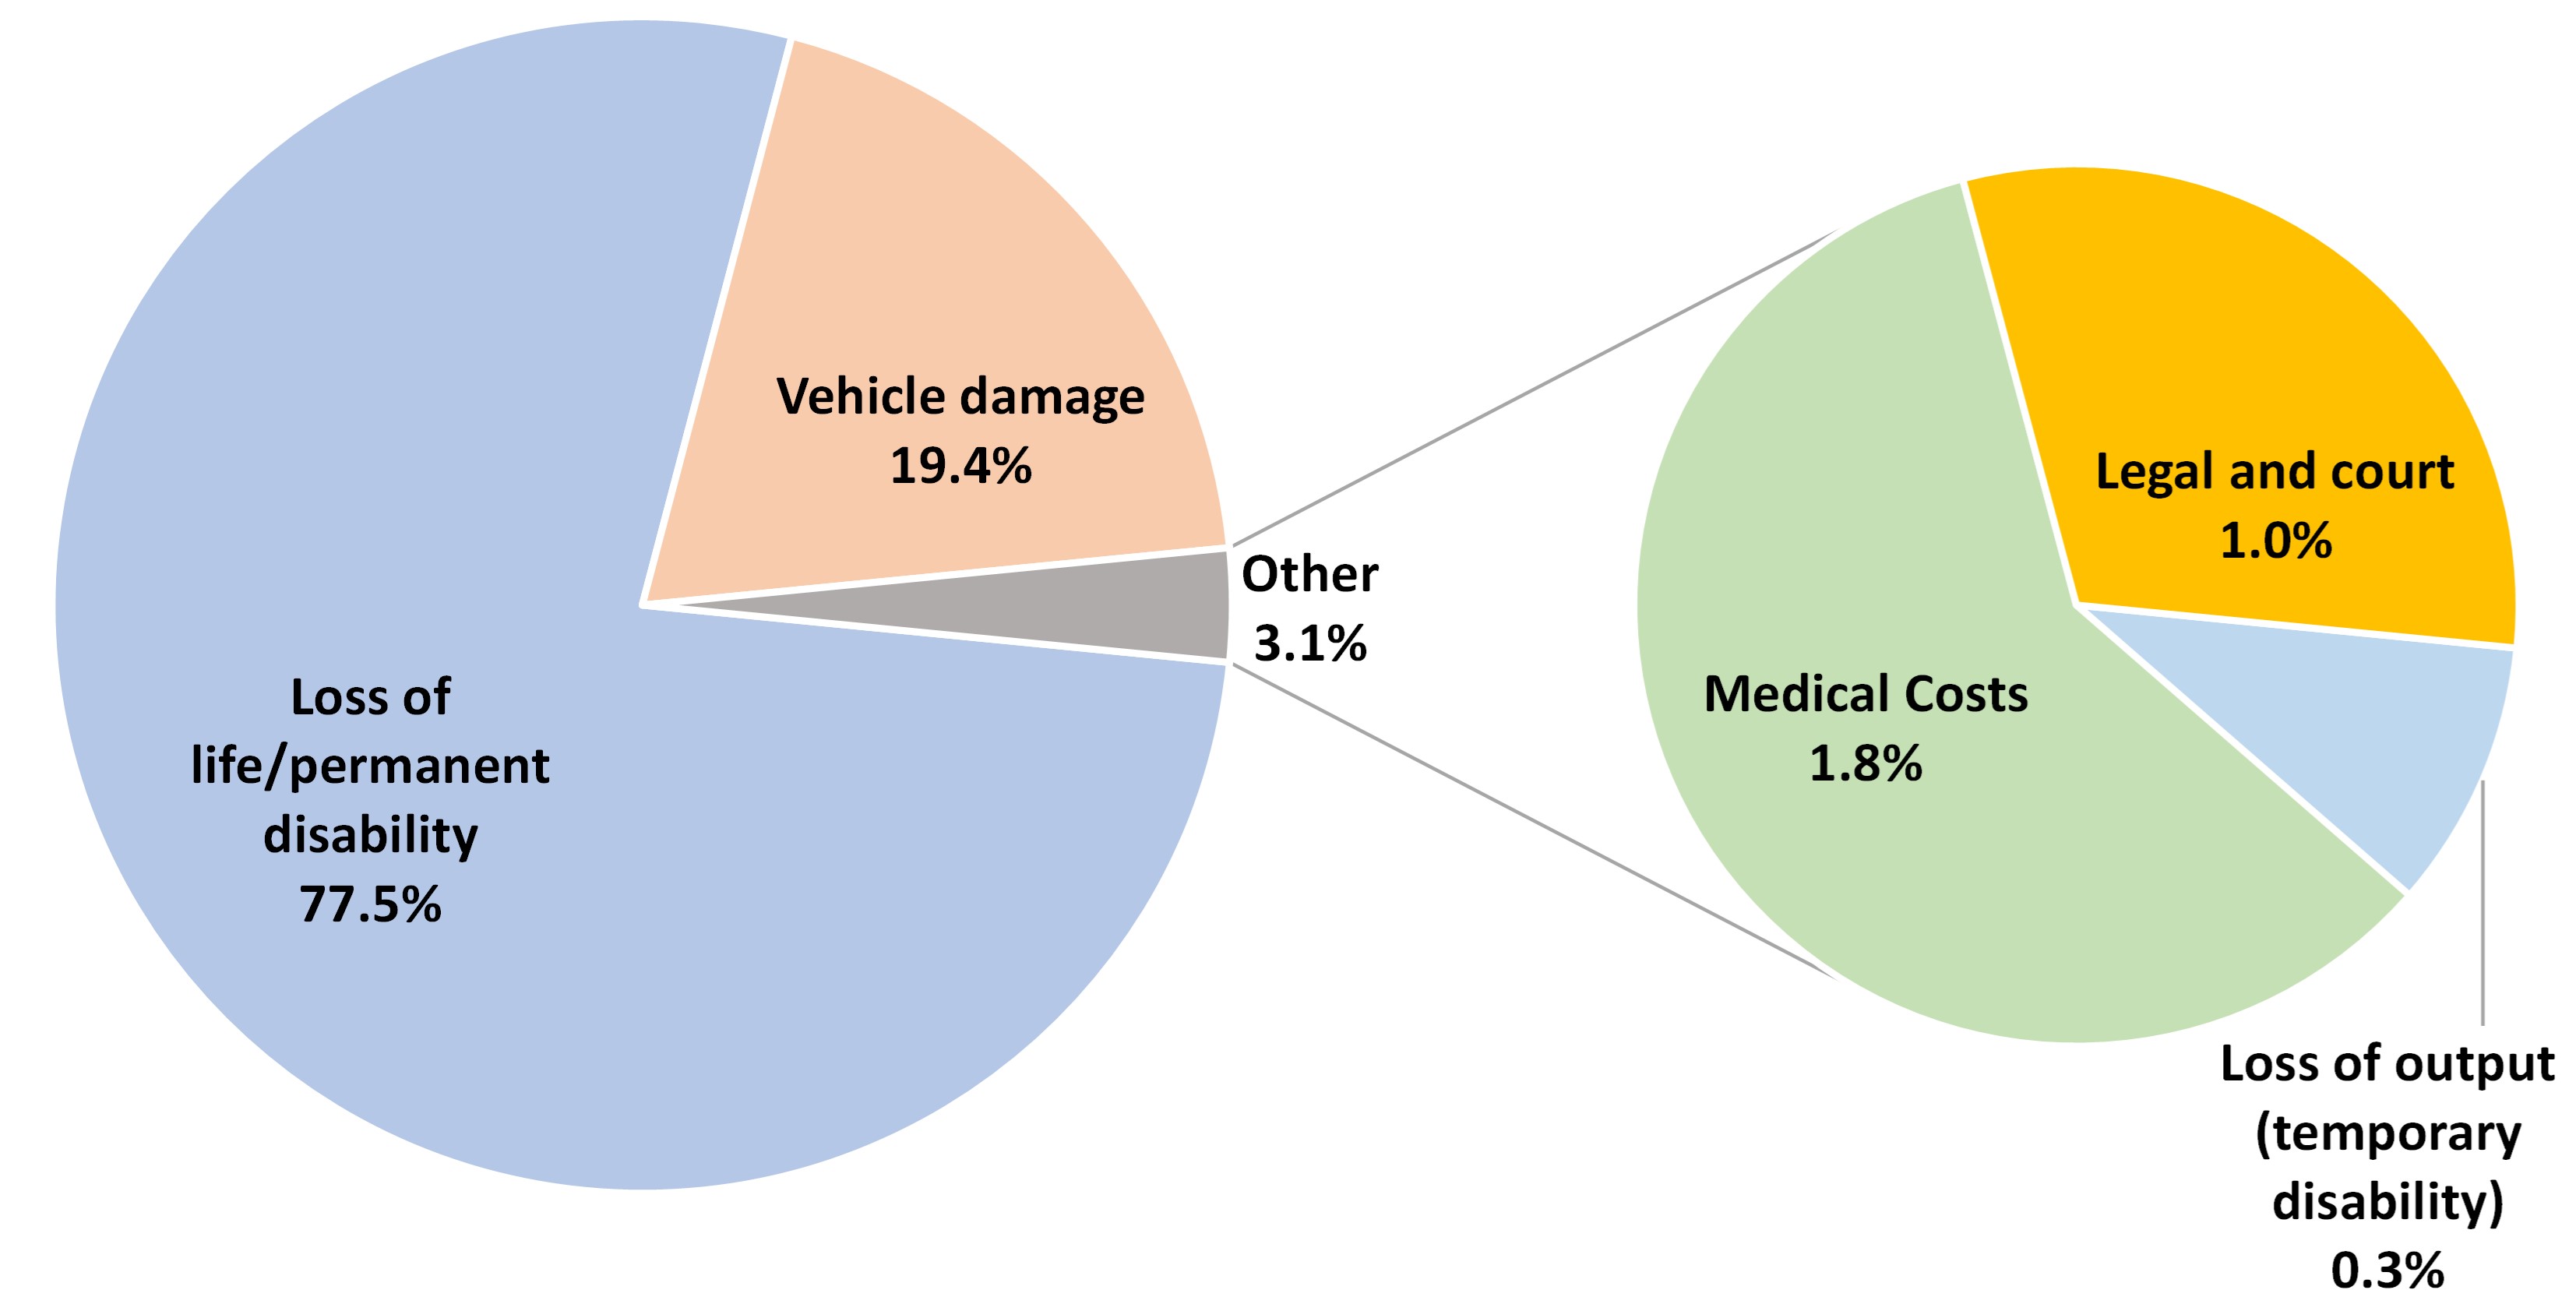 Breakdown of annual cost components of motor vehicle accidents